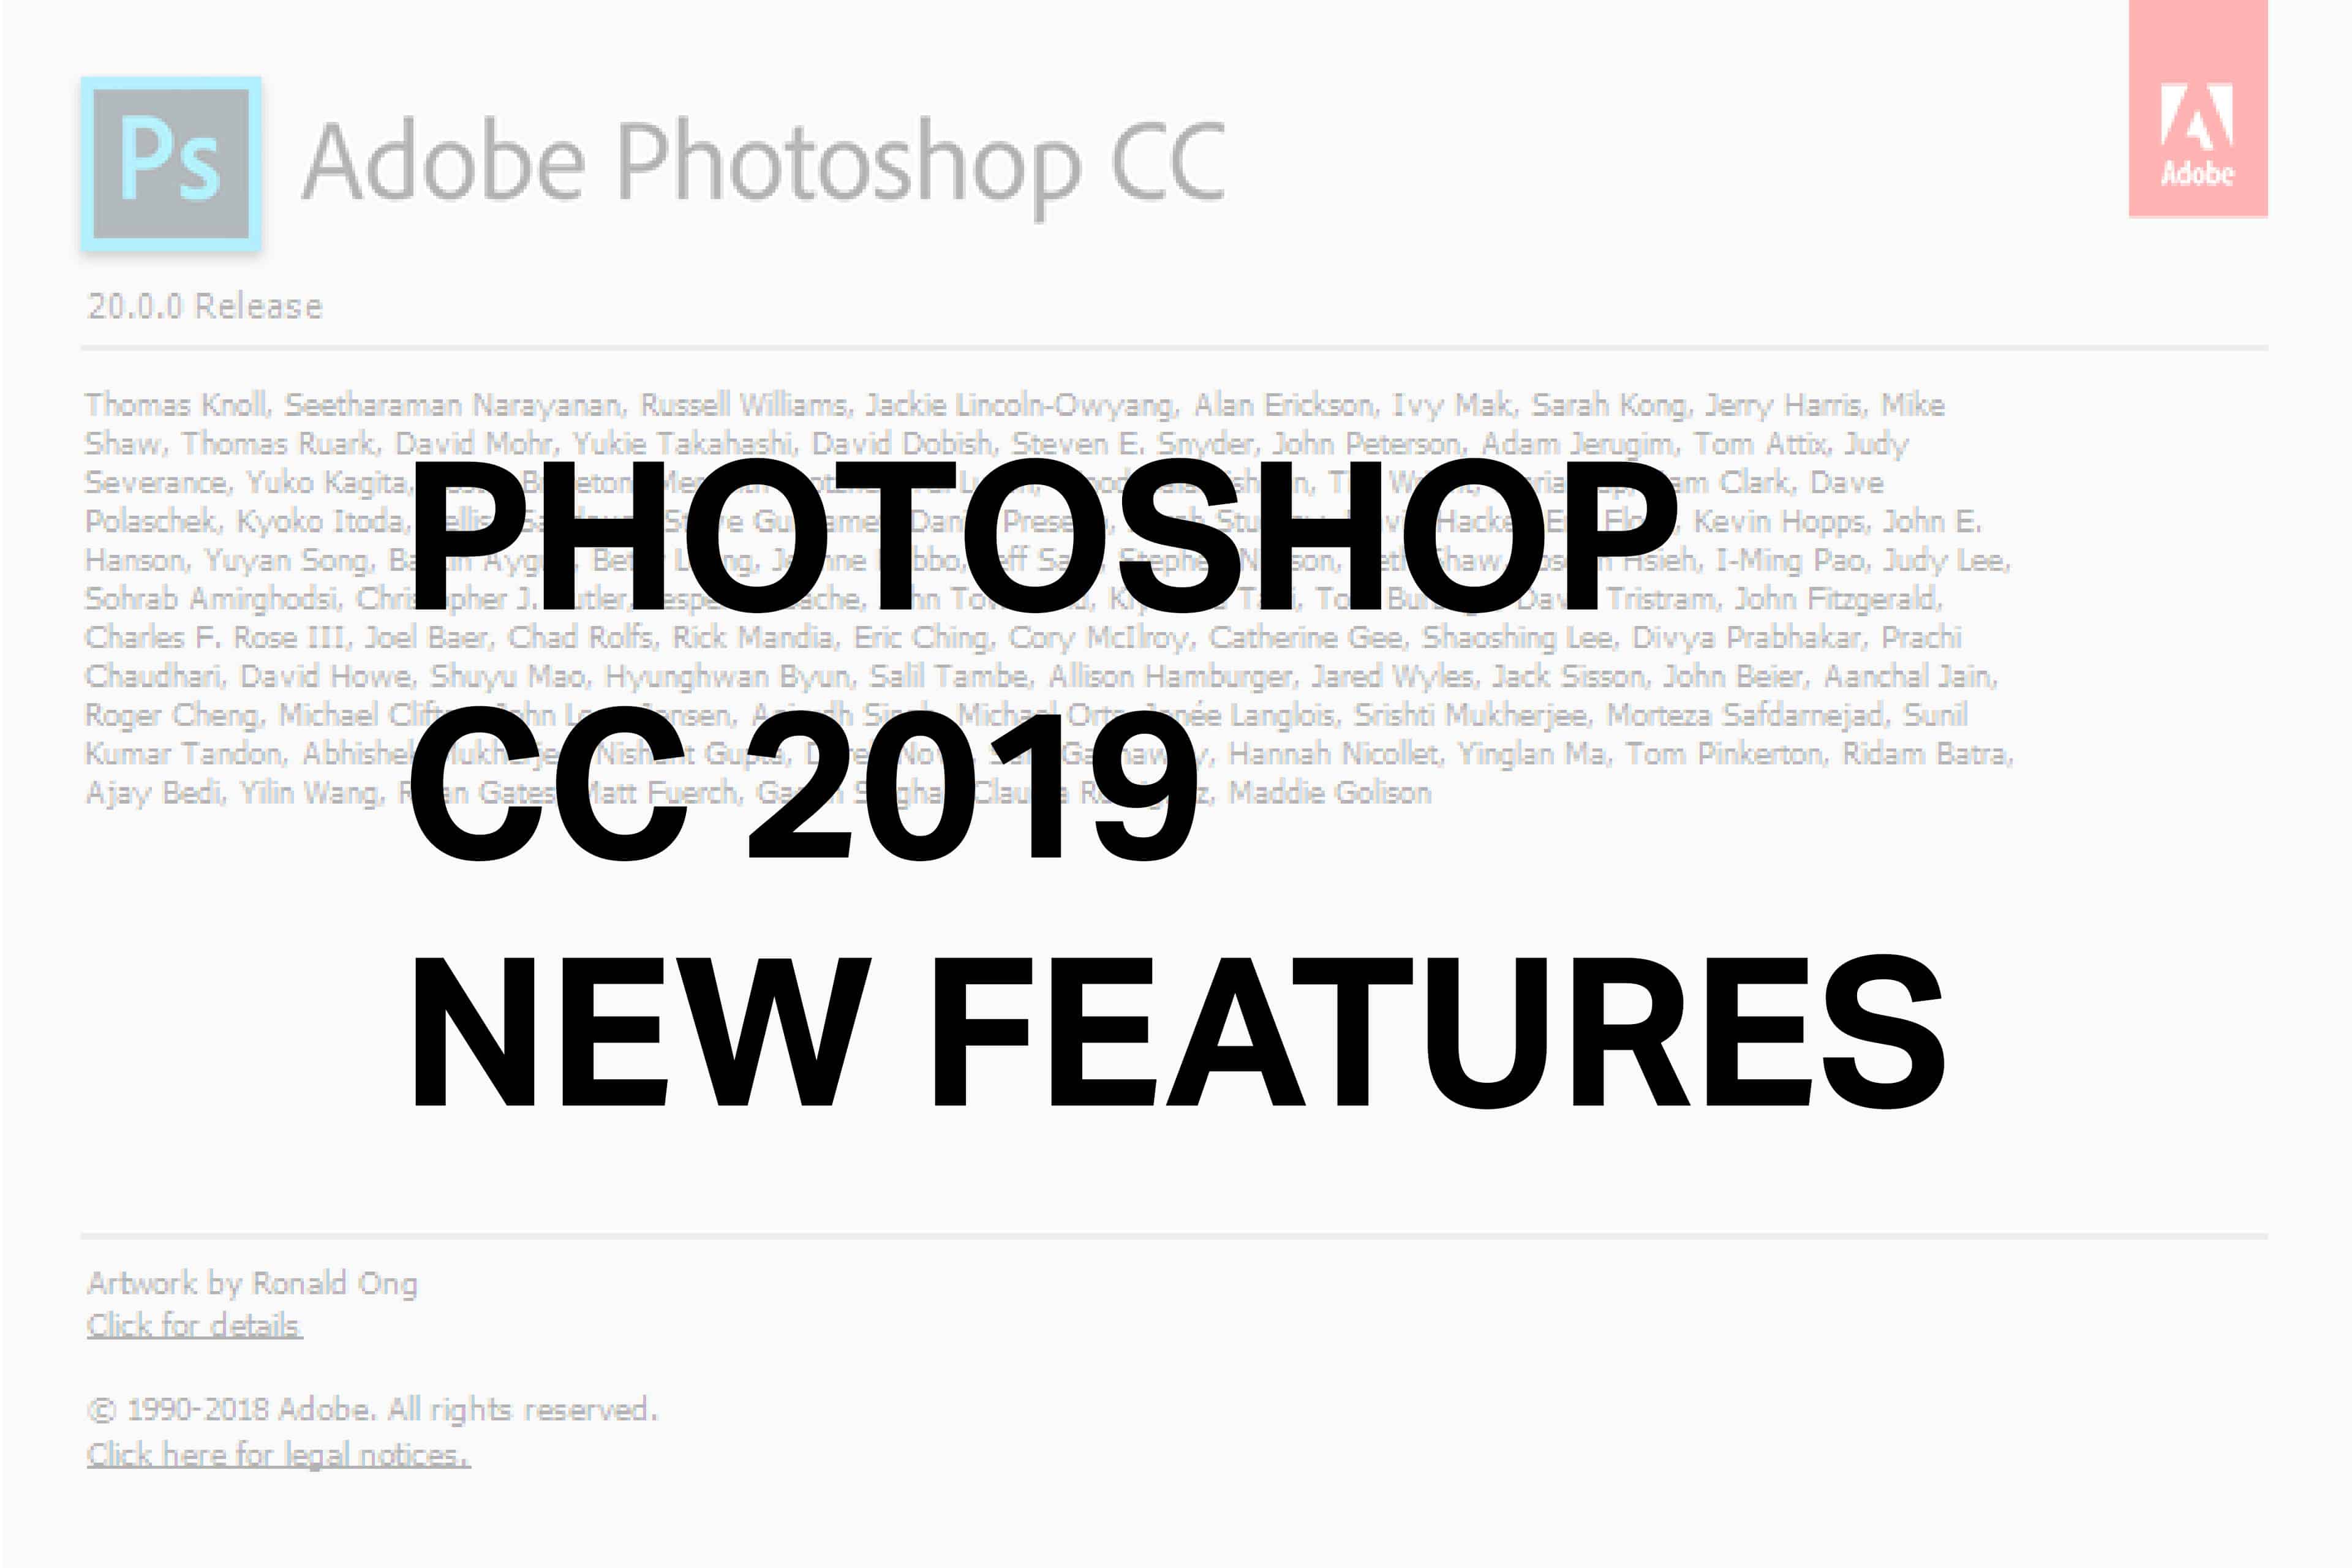 adobe photoshop cc 2019 new features download